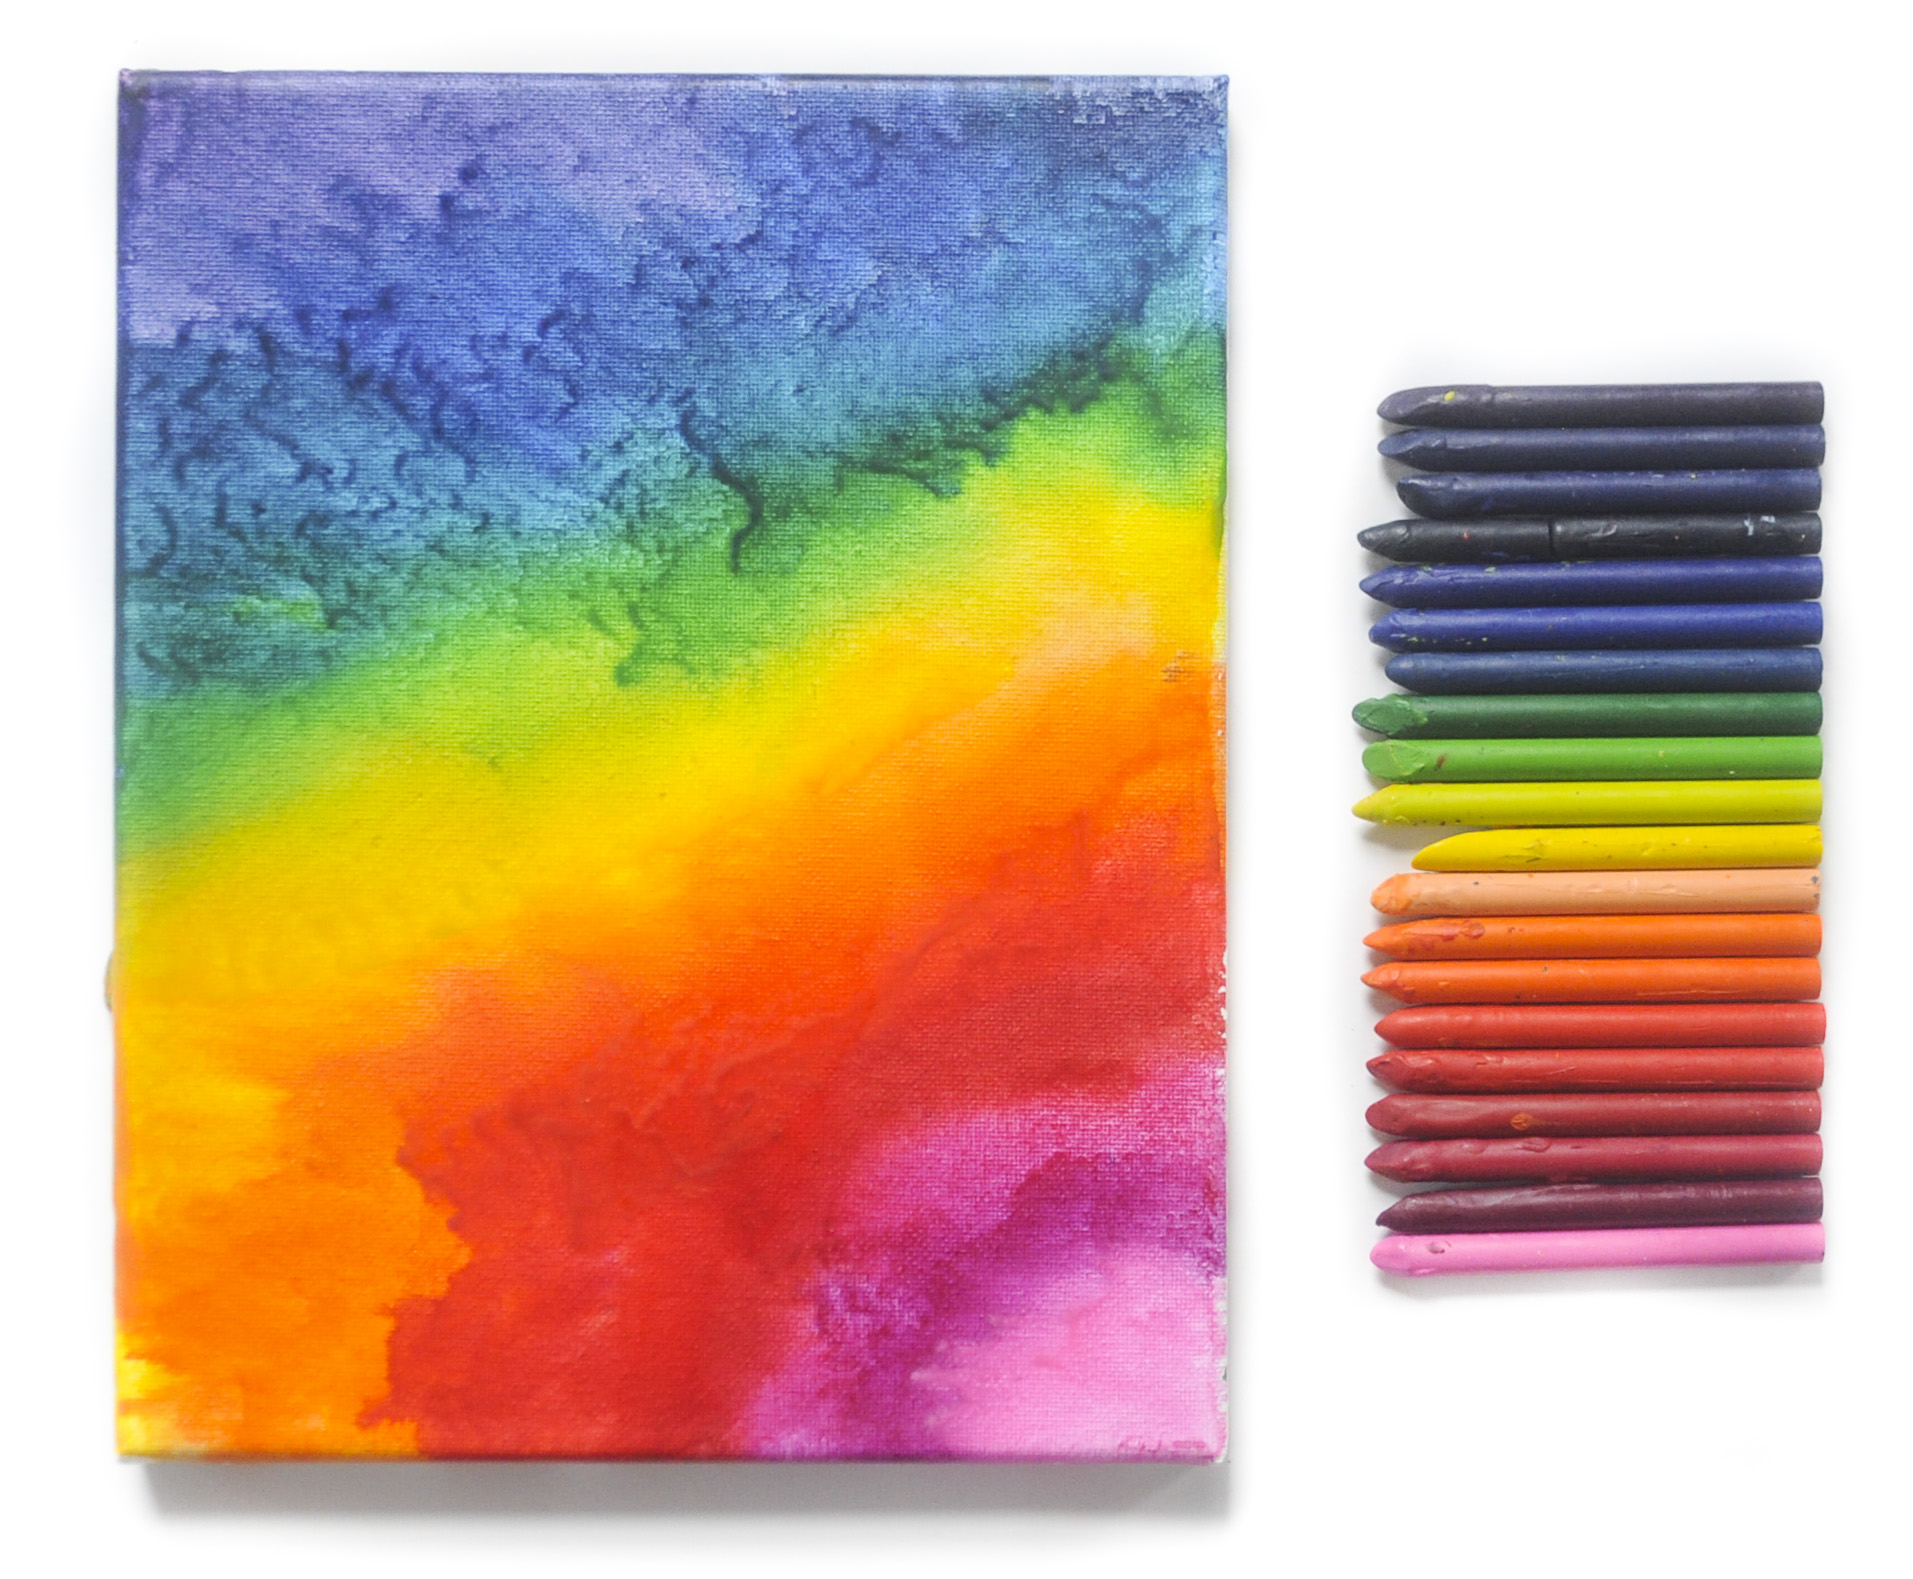 How to Melt Crayons (and Make New Ones)